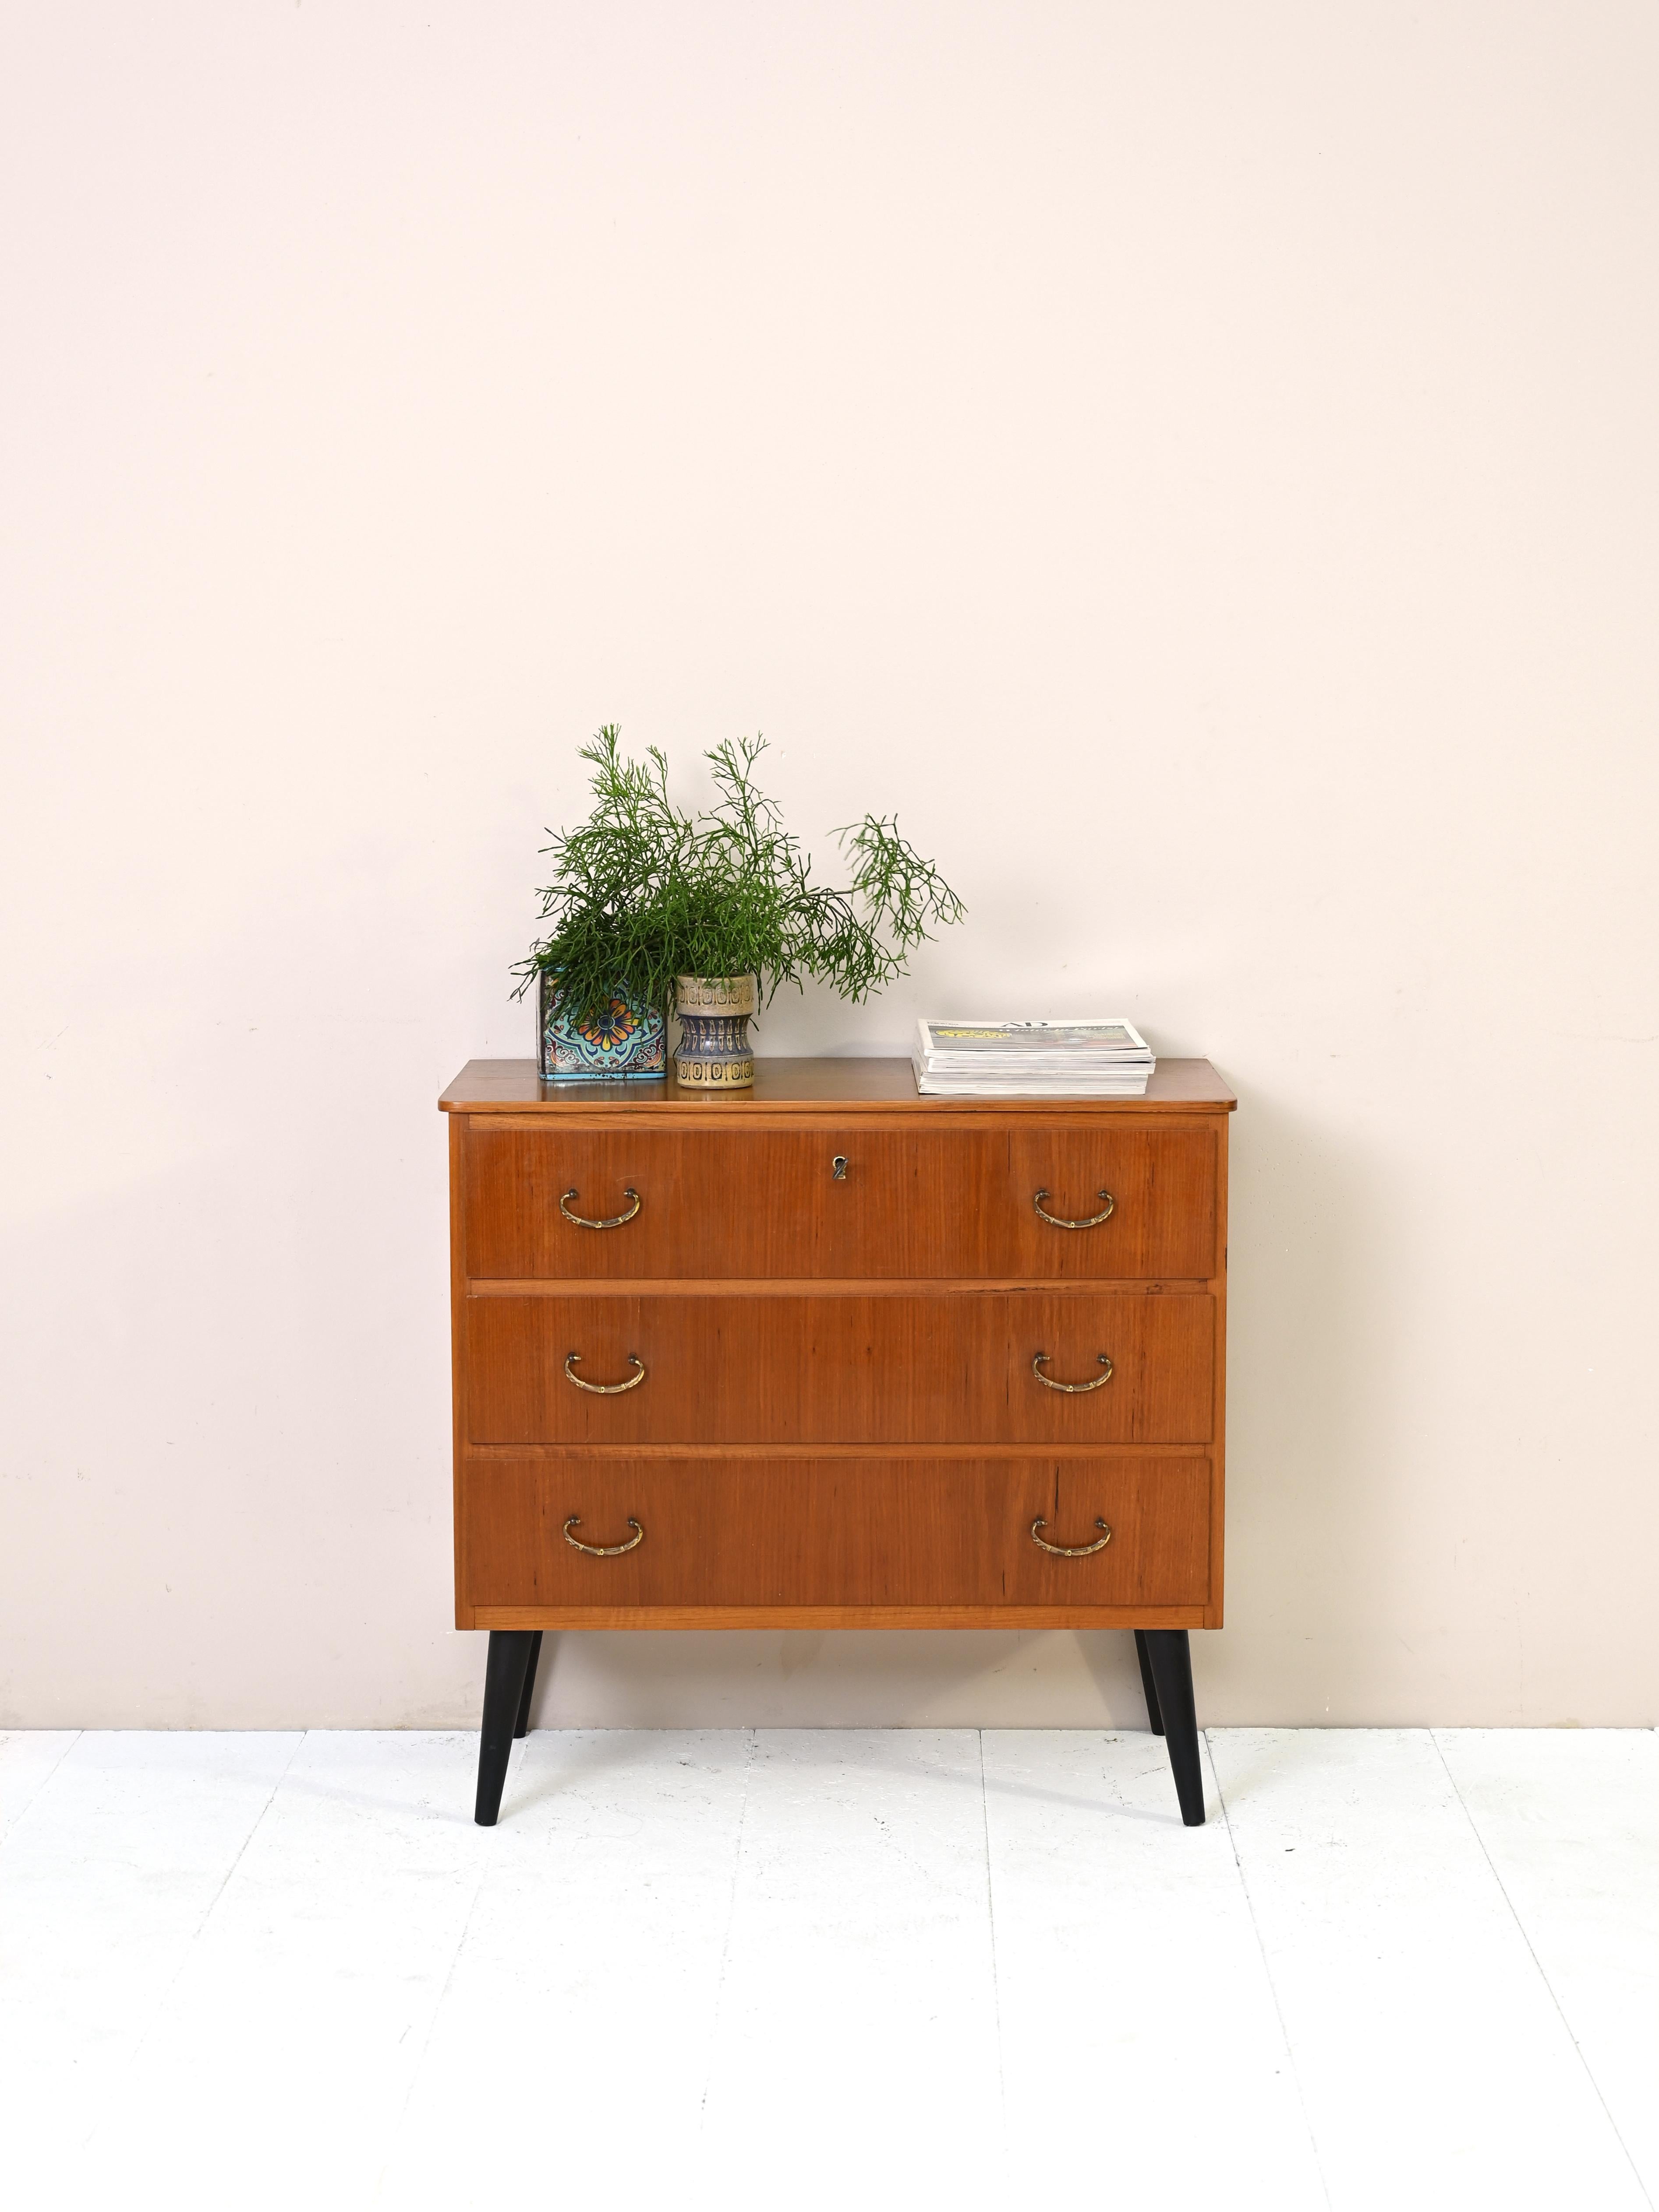 Small vintage cabinet with three drawers, the first of which has a lock.
Embellished with gilded metal handles and wooden legs painted black.
This chest of drawers can be used in any room of the house, also perfect as a